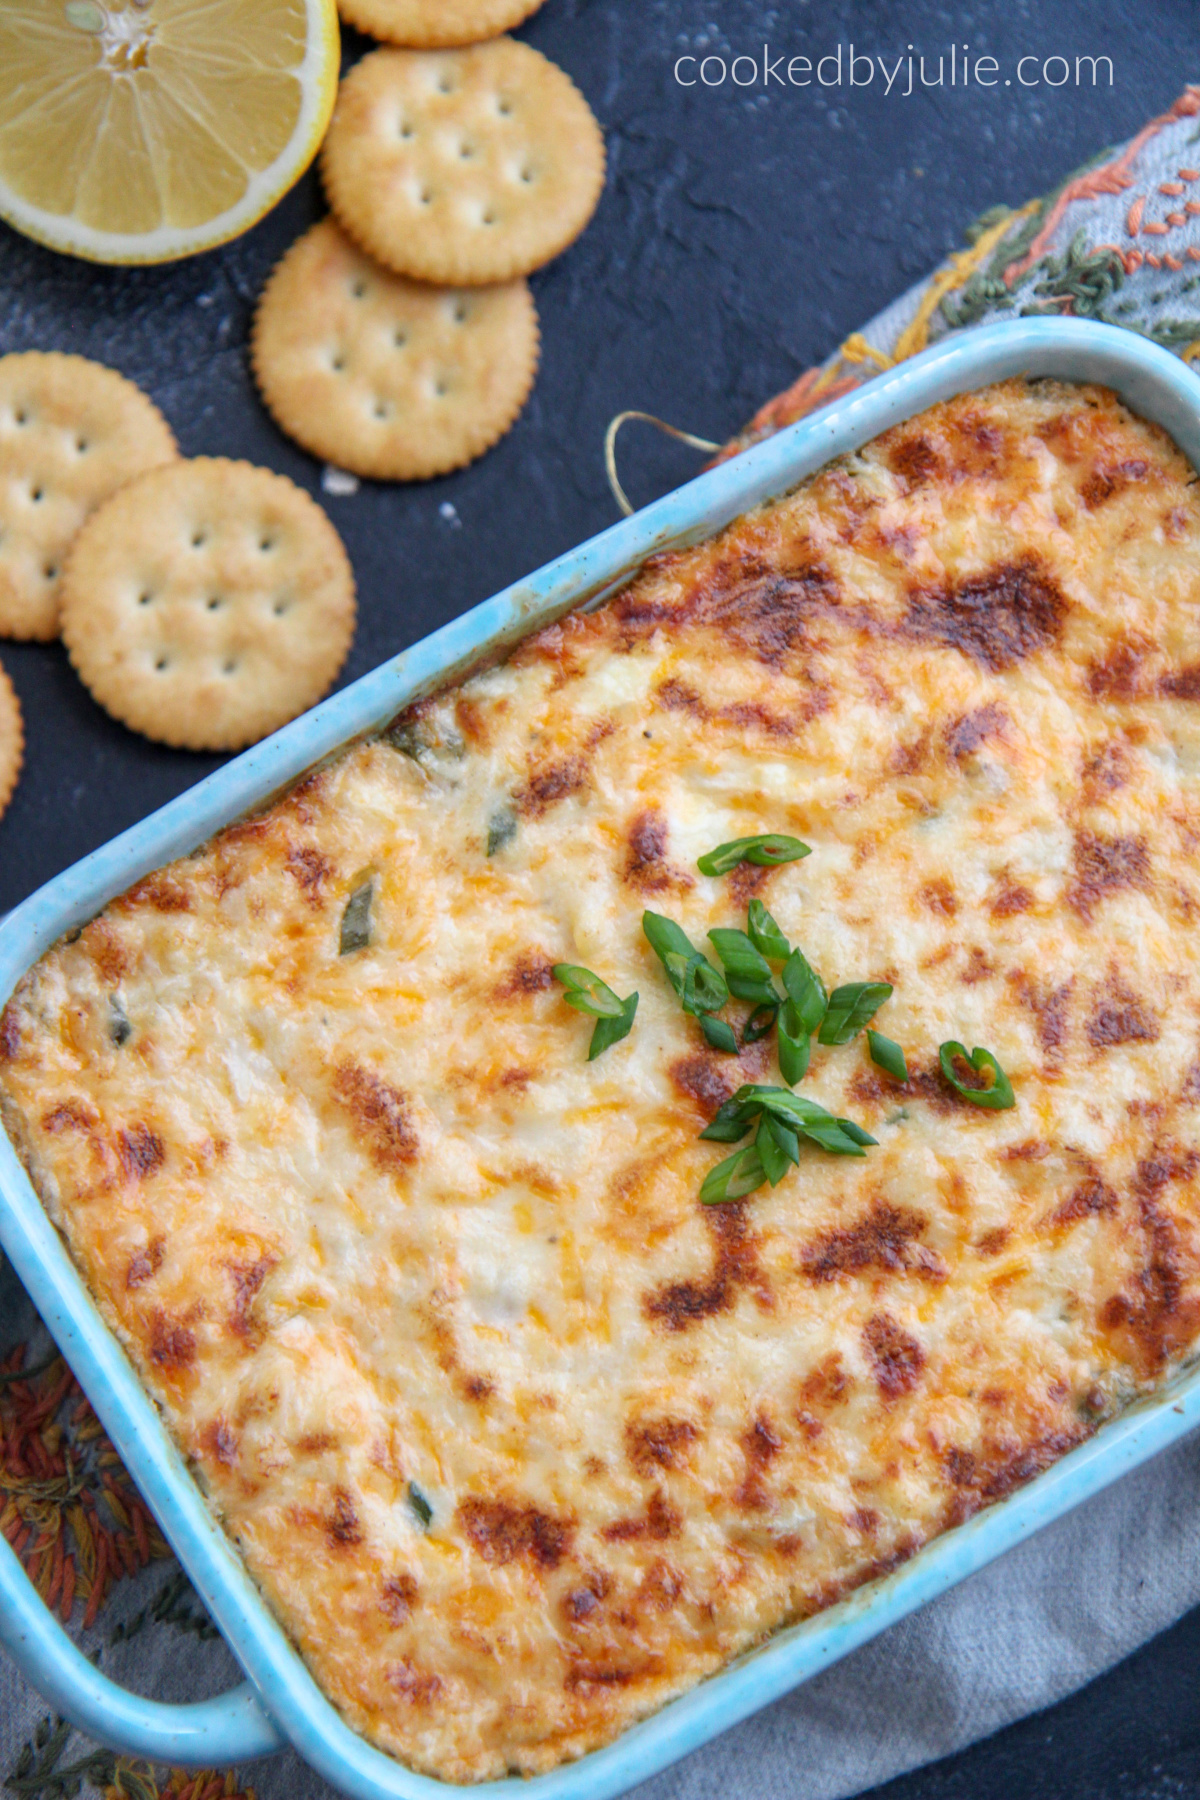 crab dip with green onions and ritz crackers.